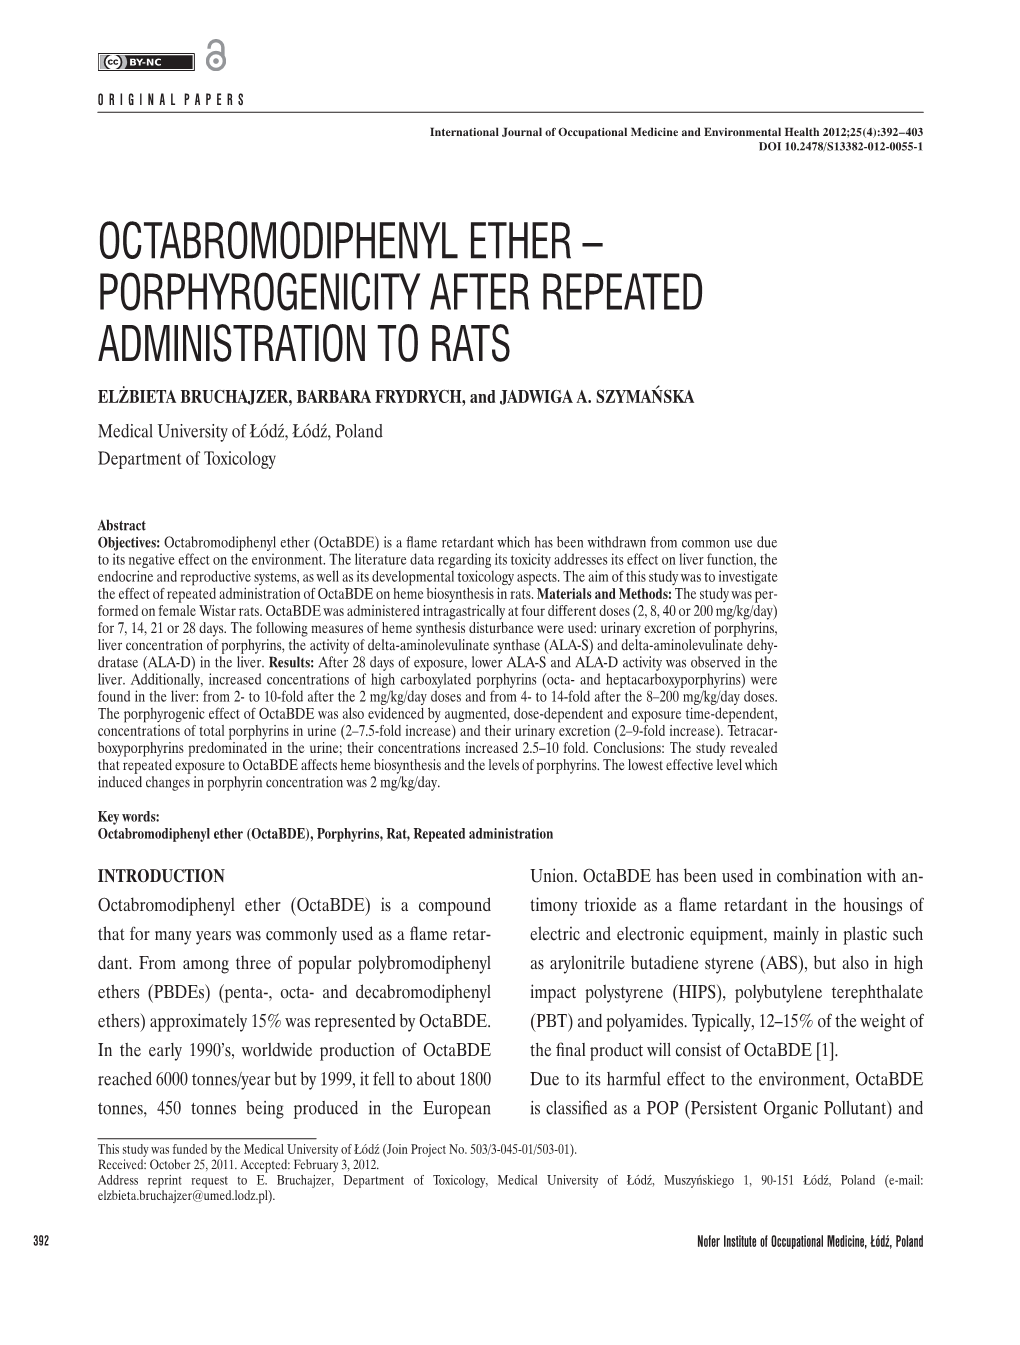 OCTABROMODIPHENYL ETHER – PORPHYROGENICITY AFTER REPEATED ADMINISTRATION to RATS ELŻBIETA BRUCHAJZER, BARBARA FRYDRYCH, and JADWIGA A